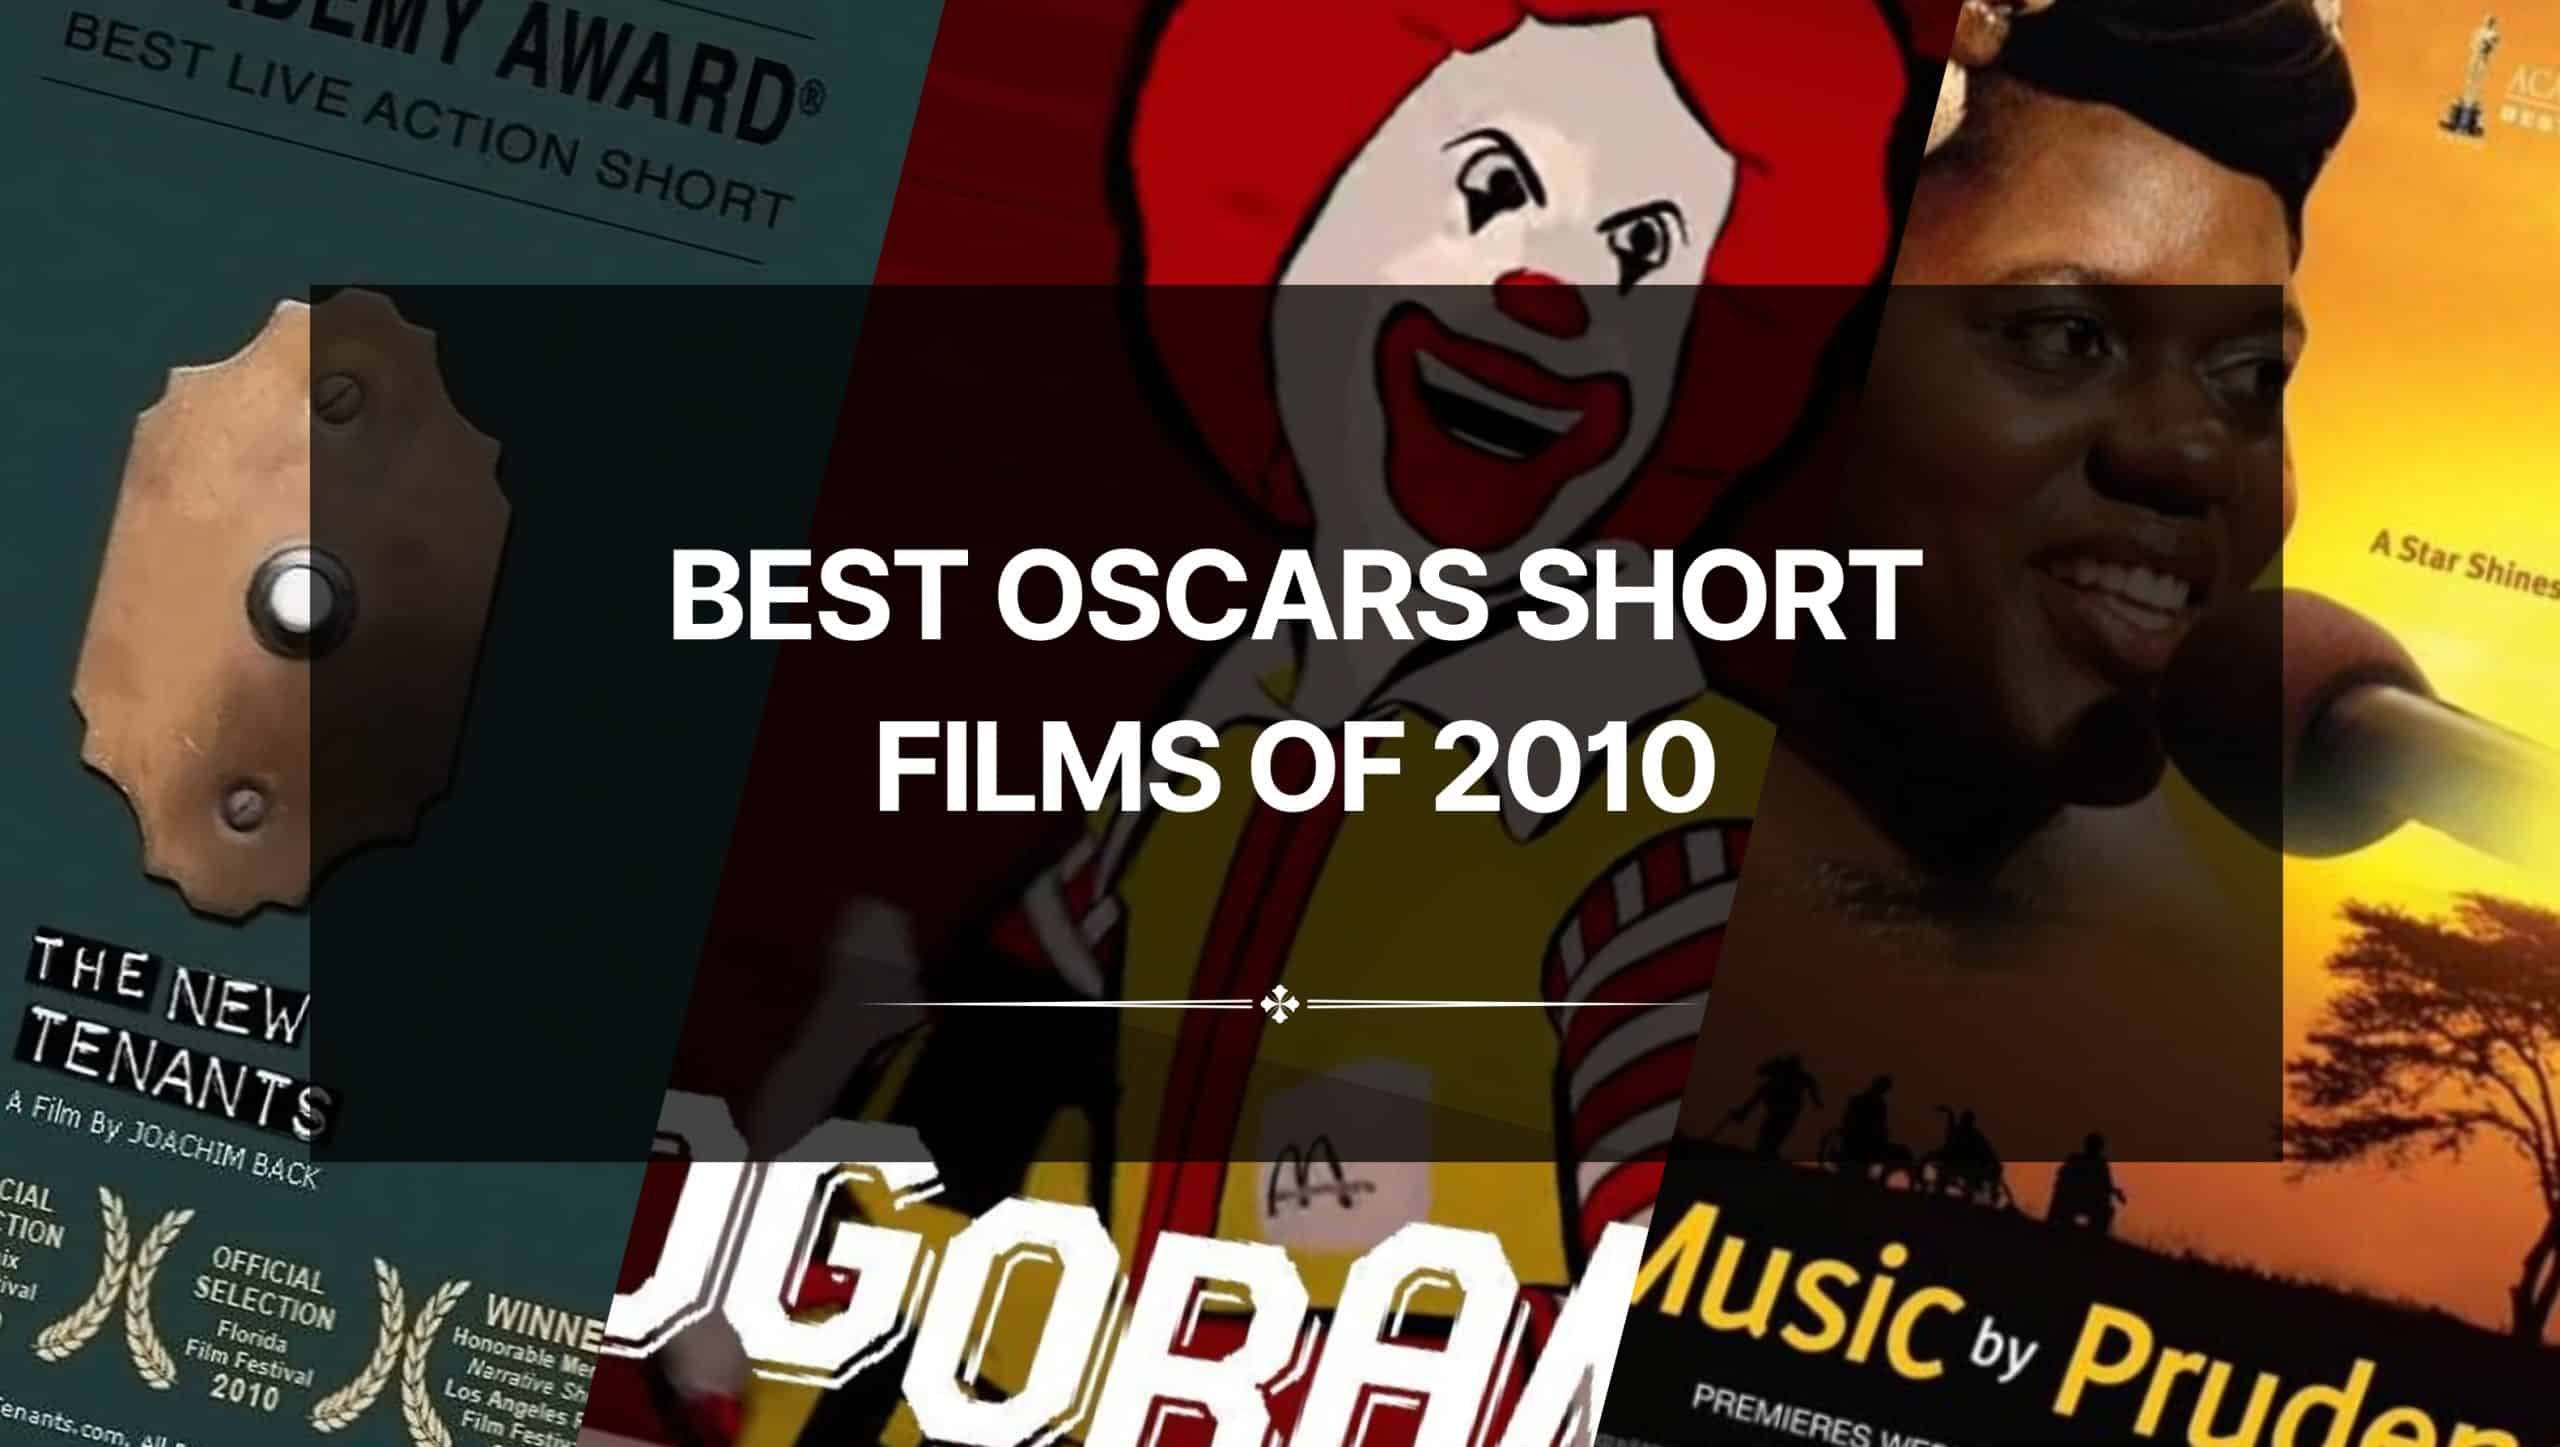 The Best Oscars Short Films of 2010: A Captivating Selection